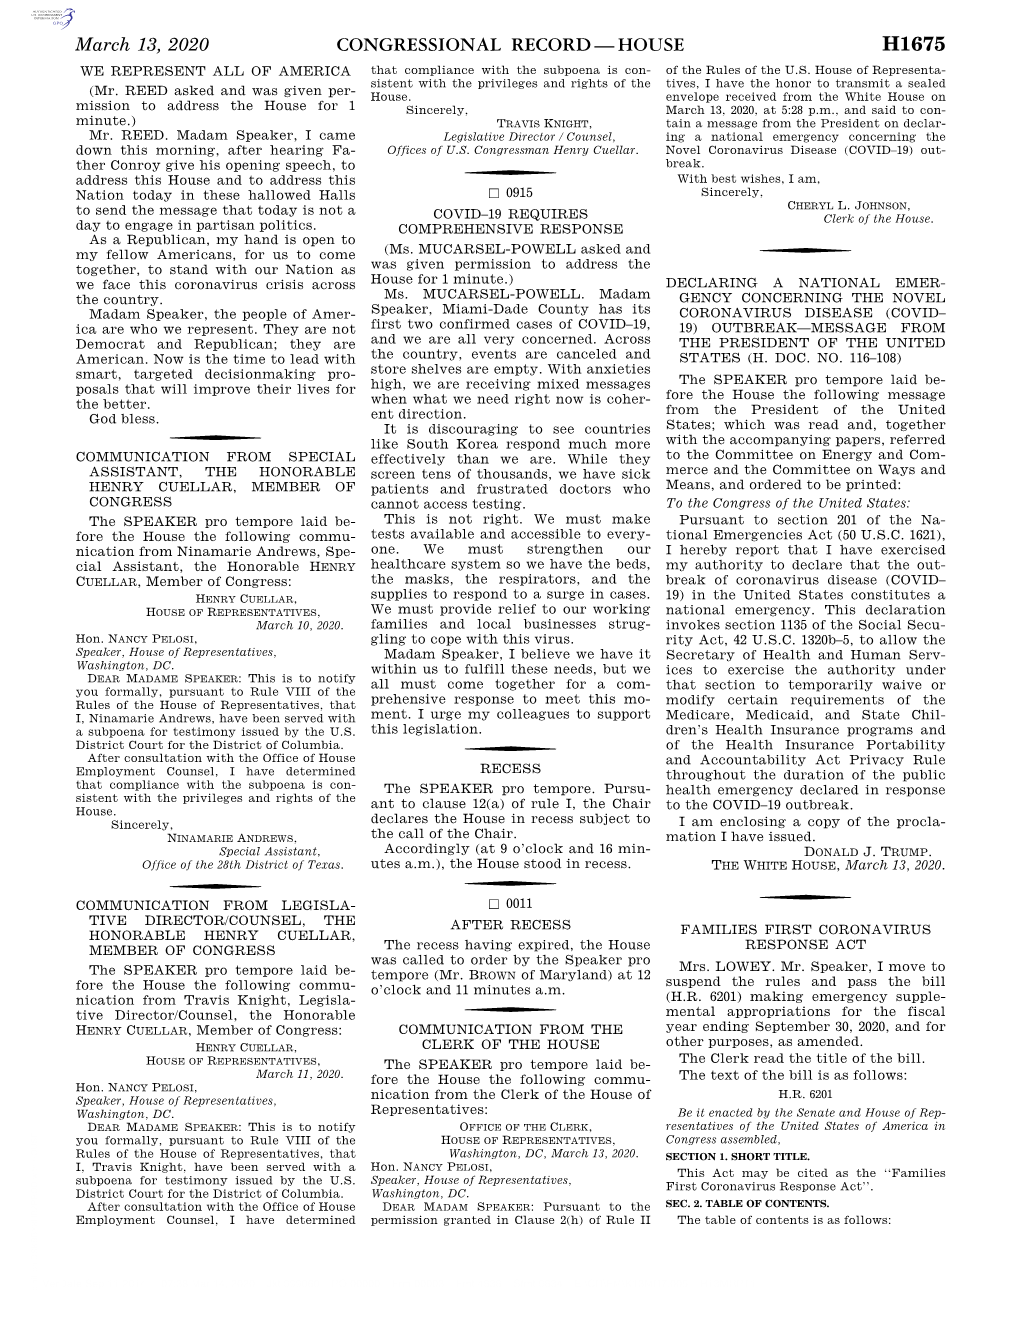 Congressional Record—House H1675